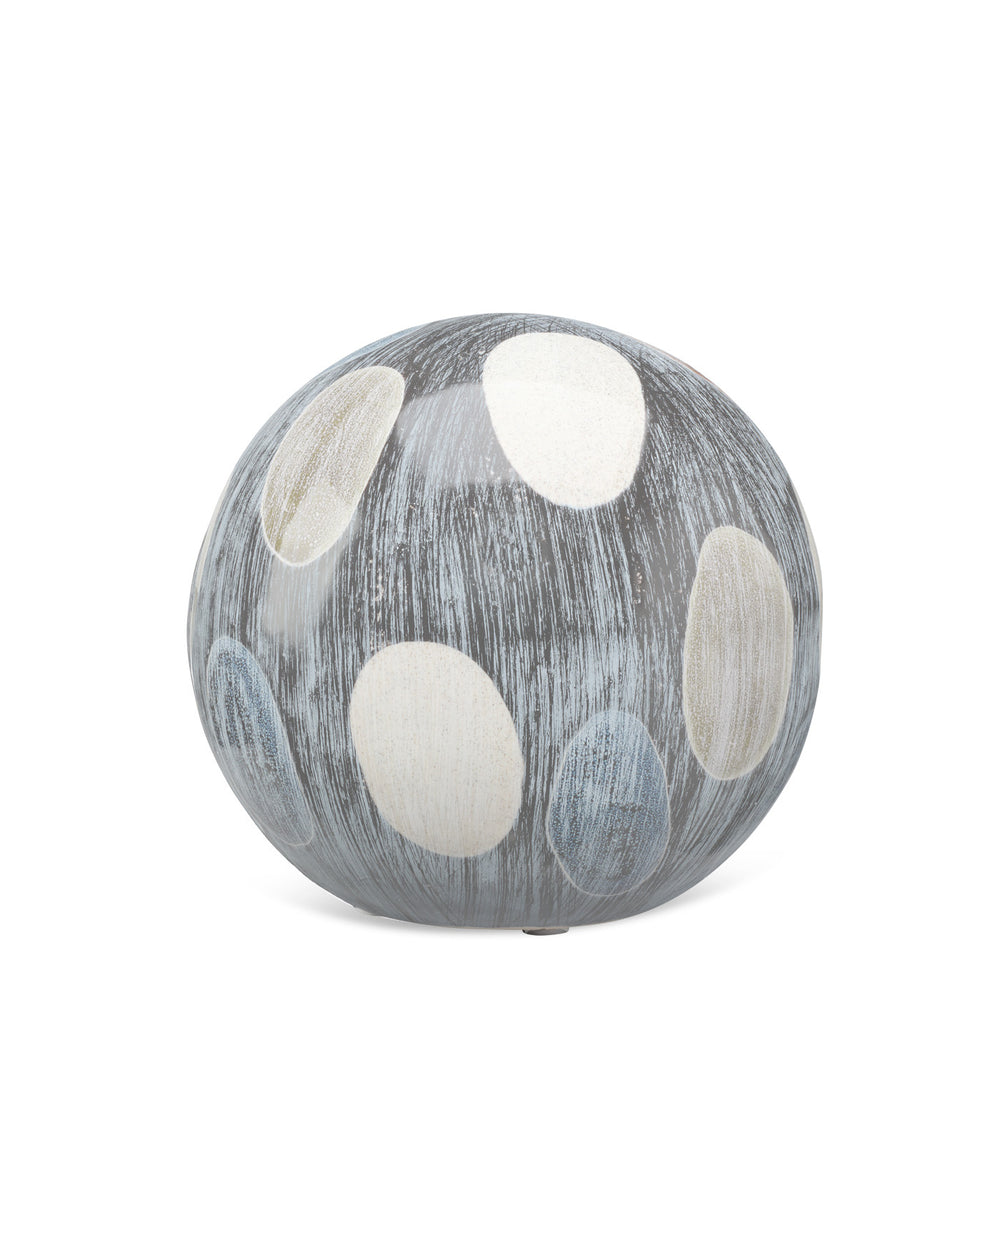 Painted Sphere Cream, White and Black Ceramic - Available in 2 Sizes